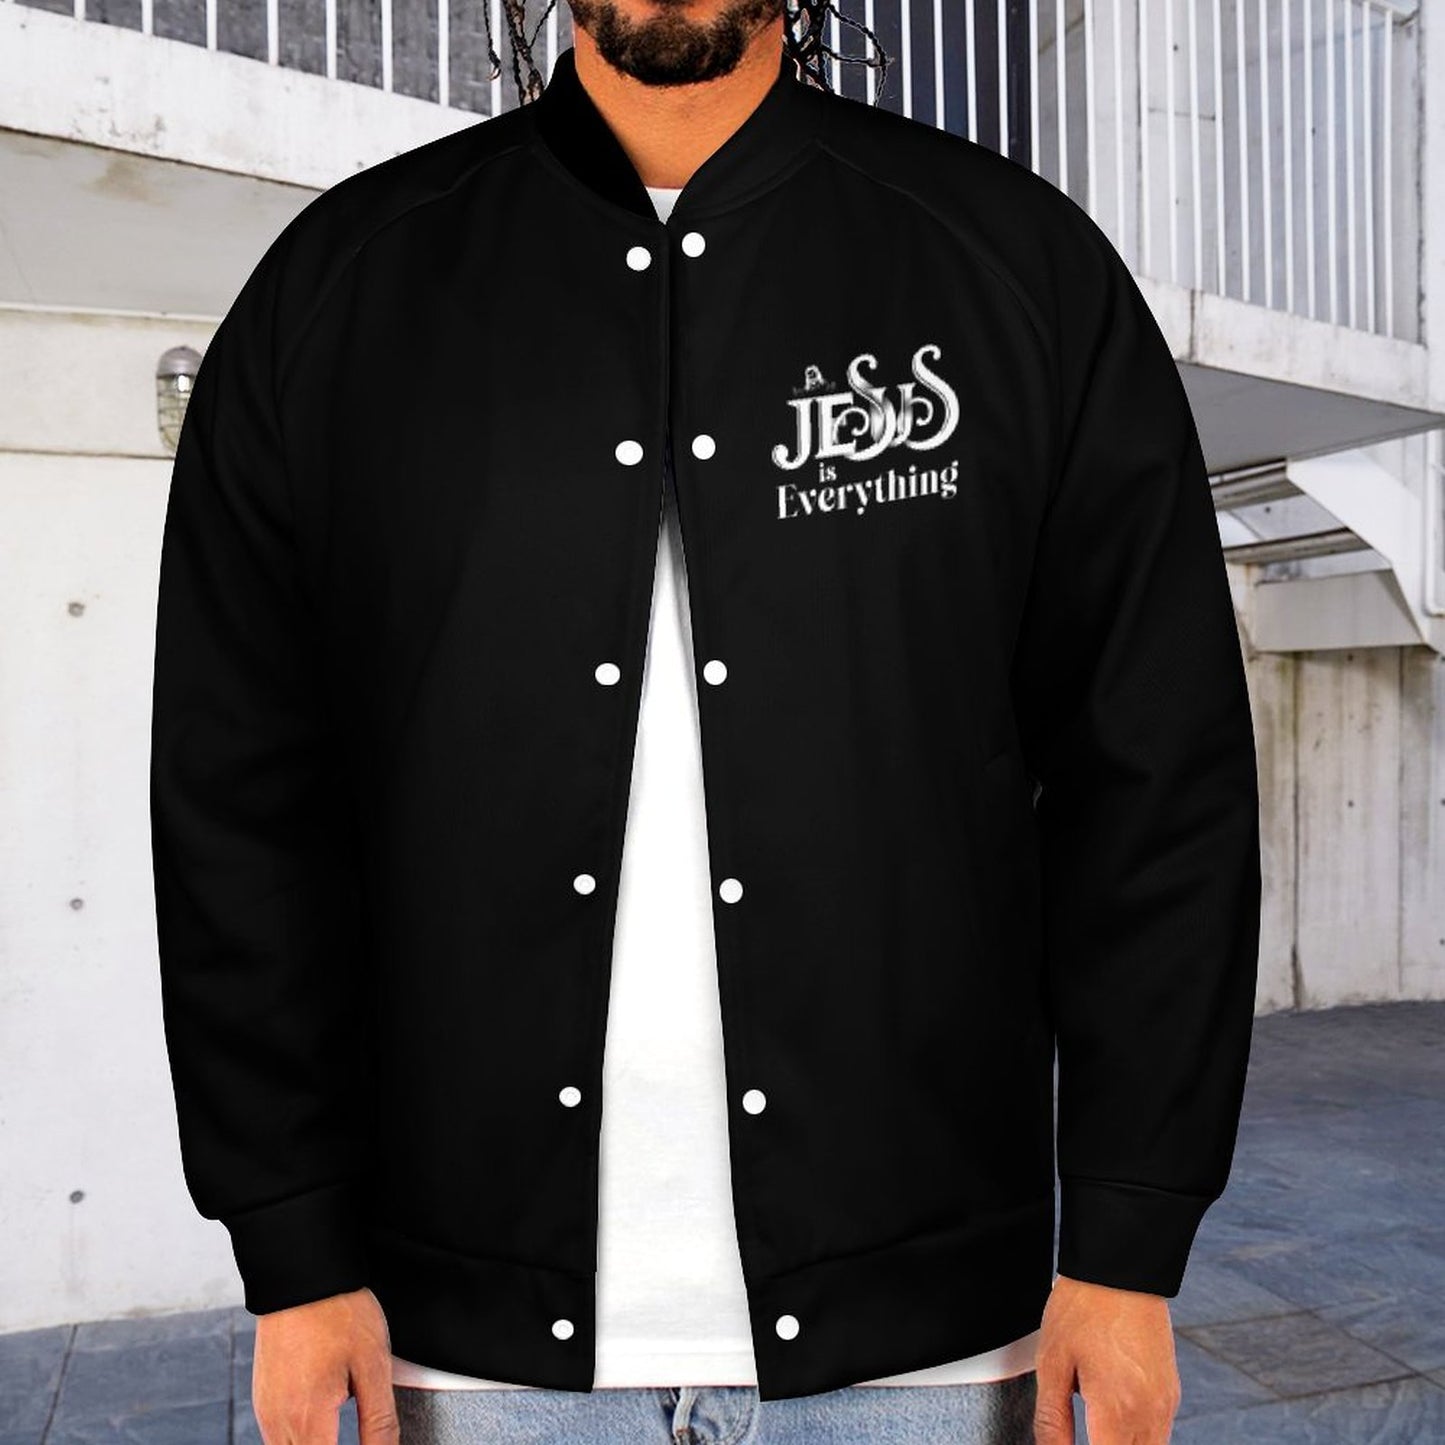 Jesus Is Everything Men's Christian Jacket SALE-Personal Design